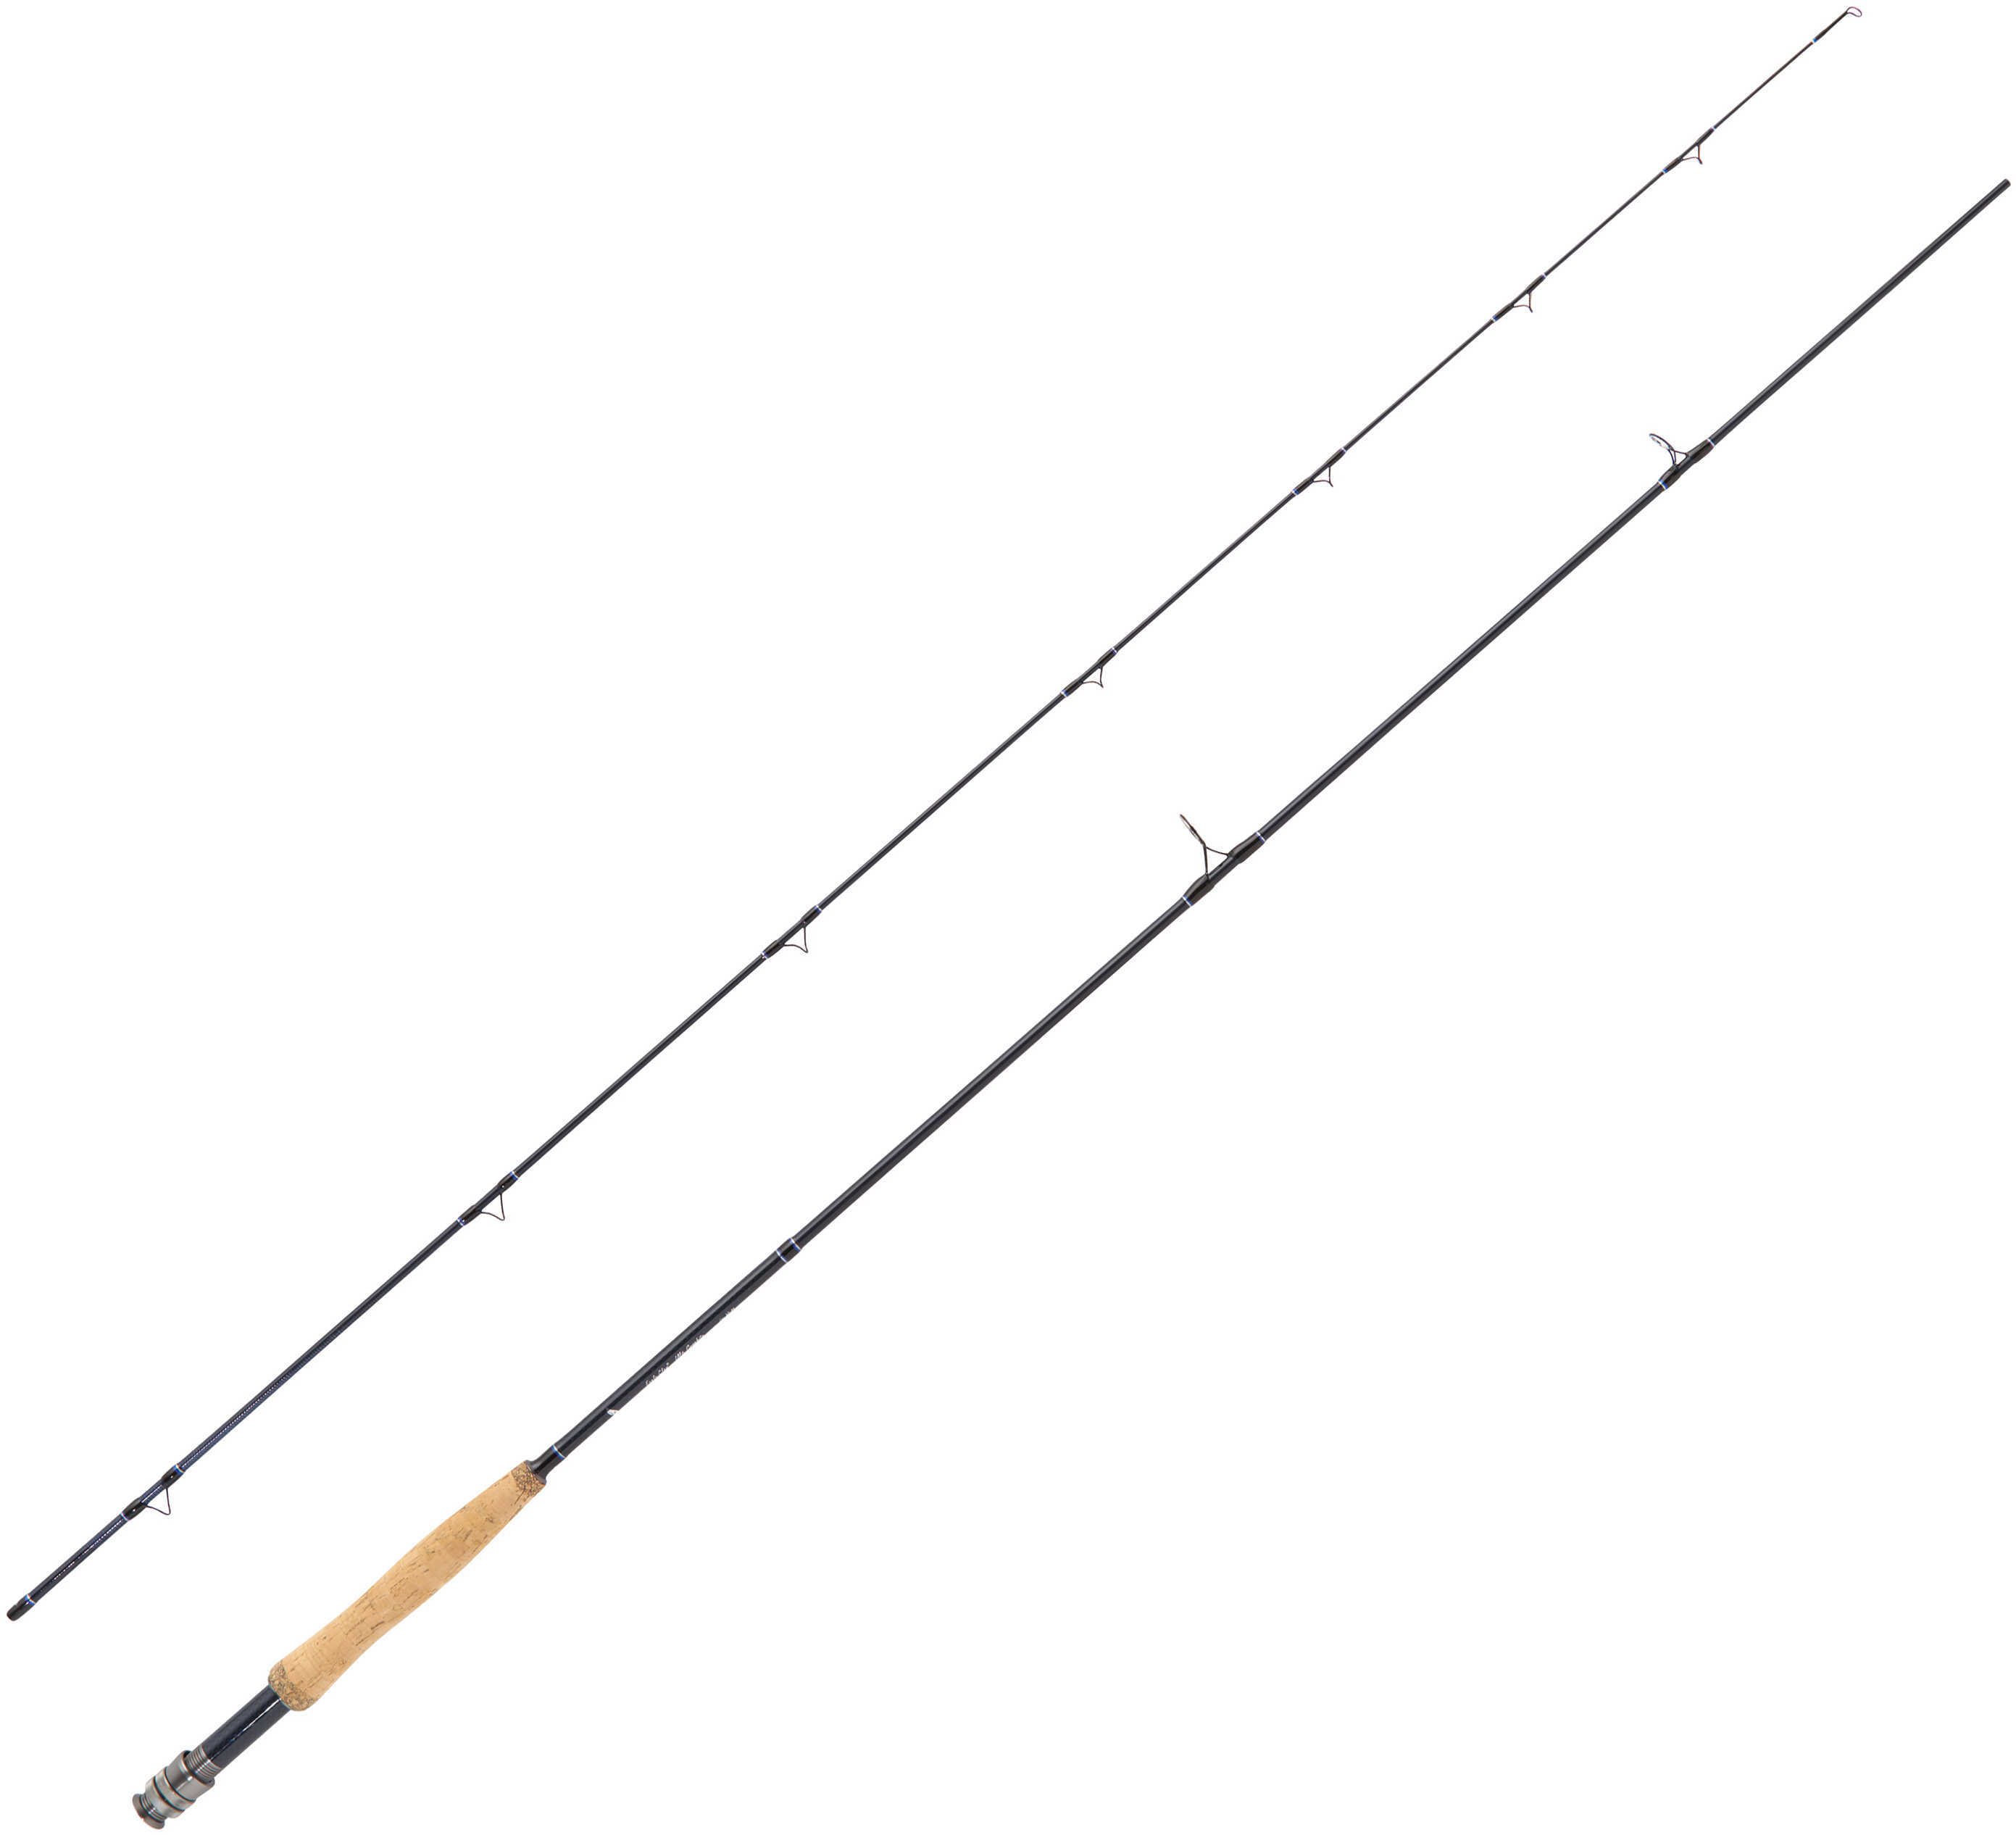 Eagle Claw Fishing Tackle DiamondSeries Graphite, 8 Foot 2-Piece, #4 Line Rating FlyRod Md: BD84F2